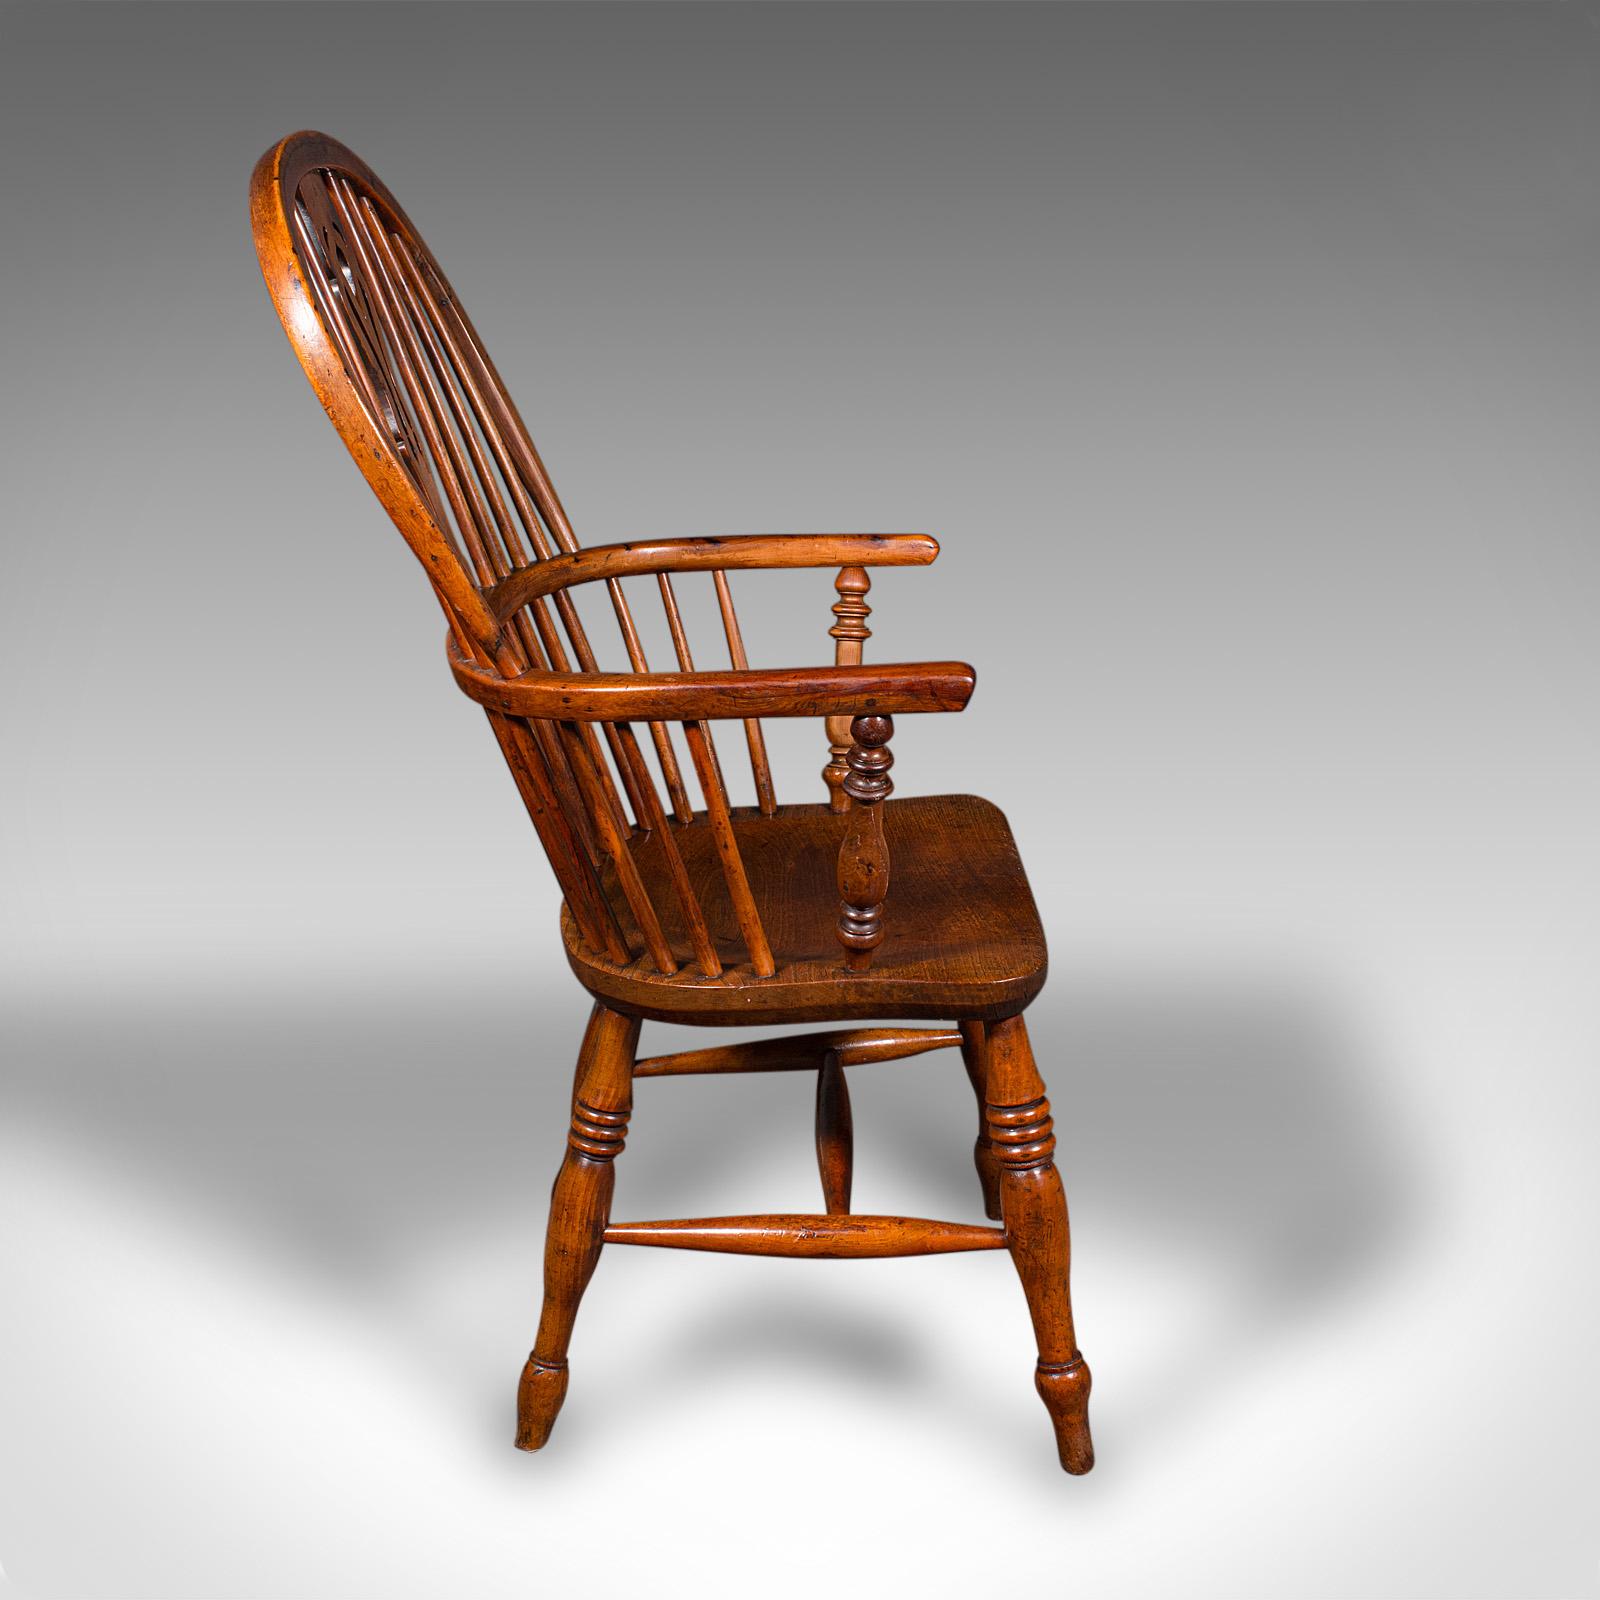 British Antique Windsor Chair, English, Elm, Elbow, Armchair, Country House, Victorian